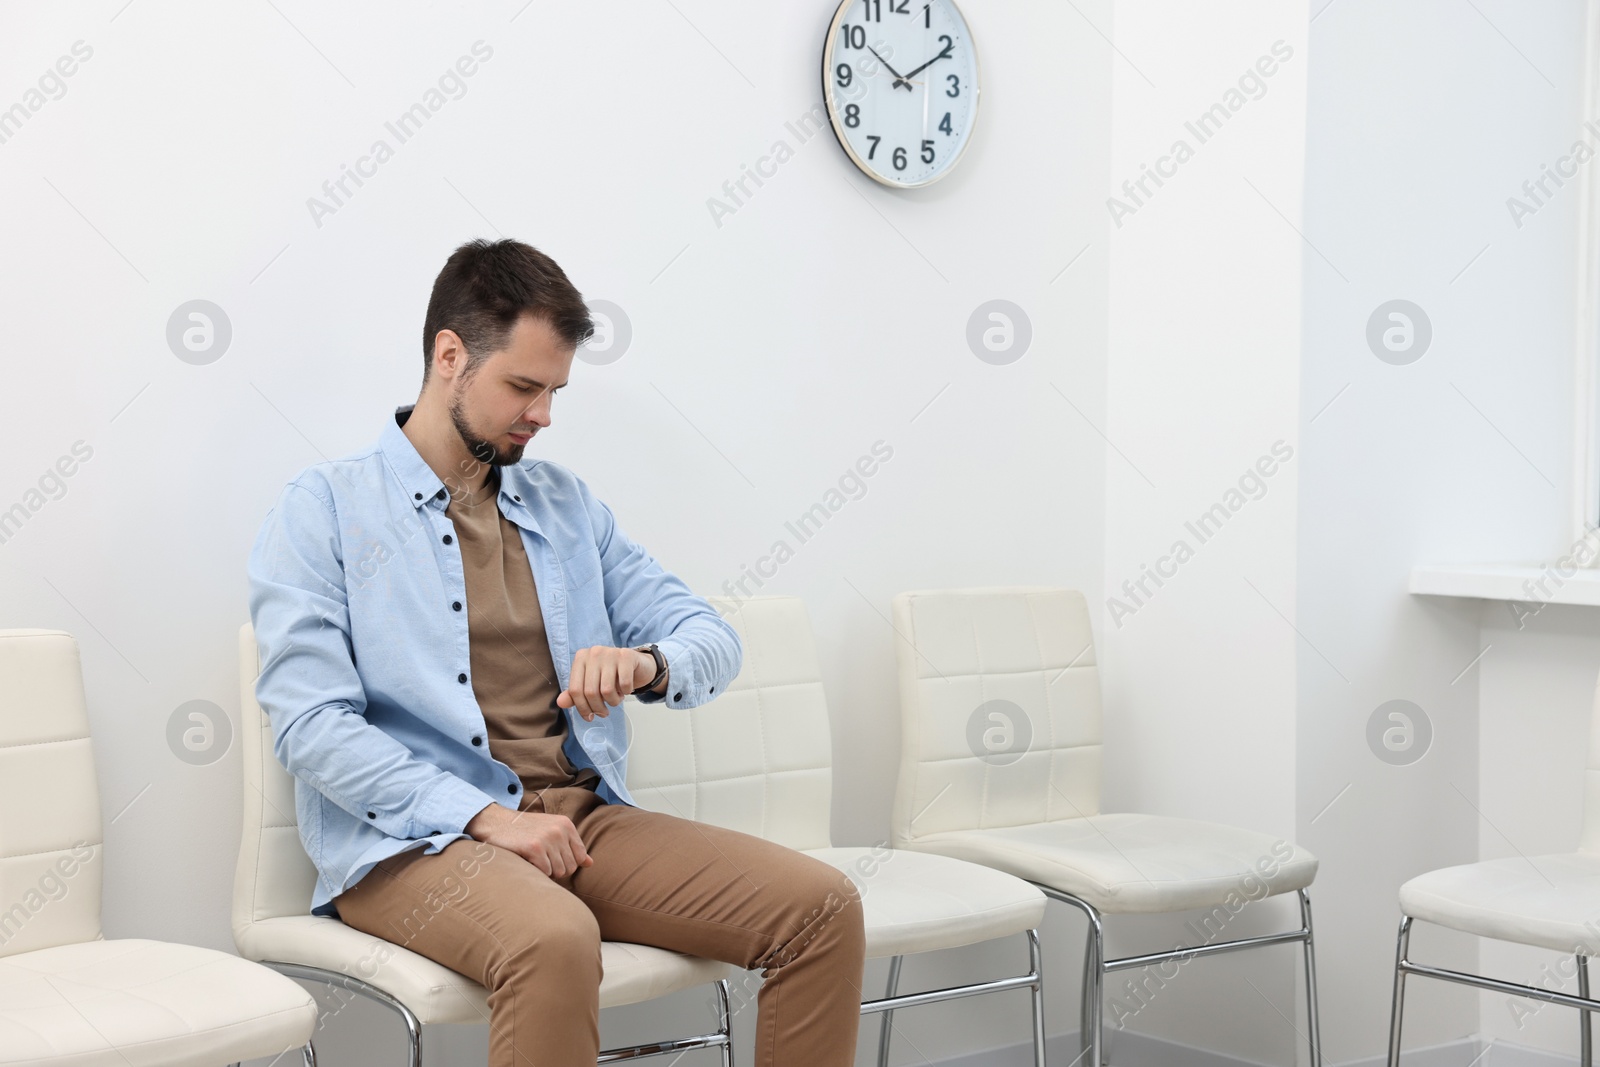 Photo of Man looking at wrist watch and waiting for appointment indoors